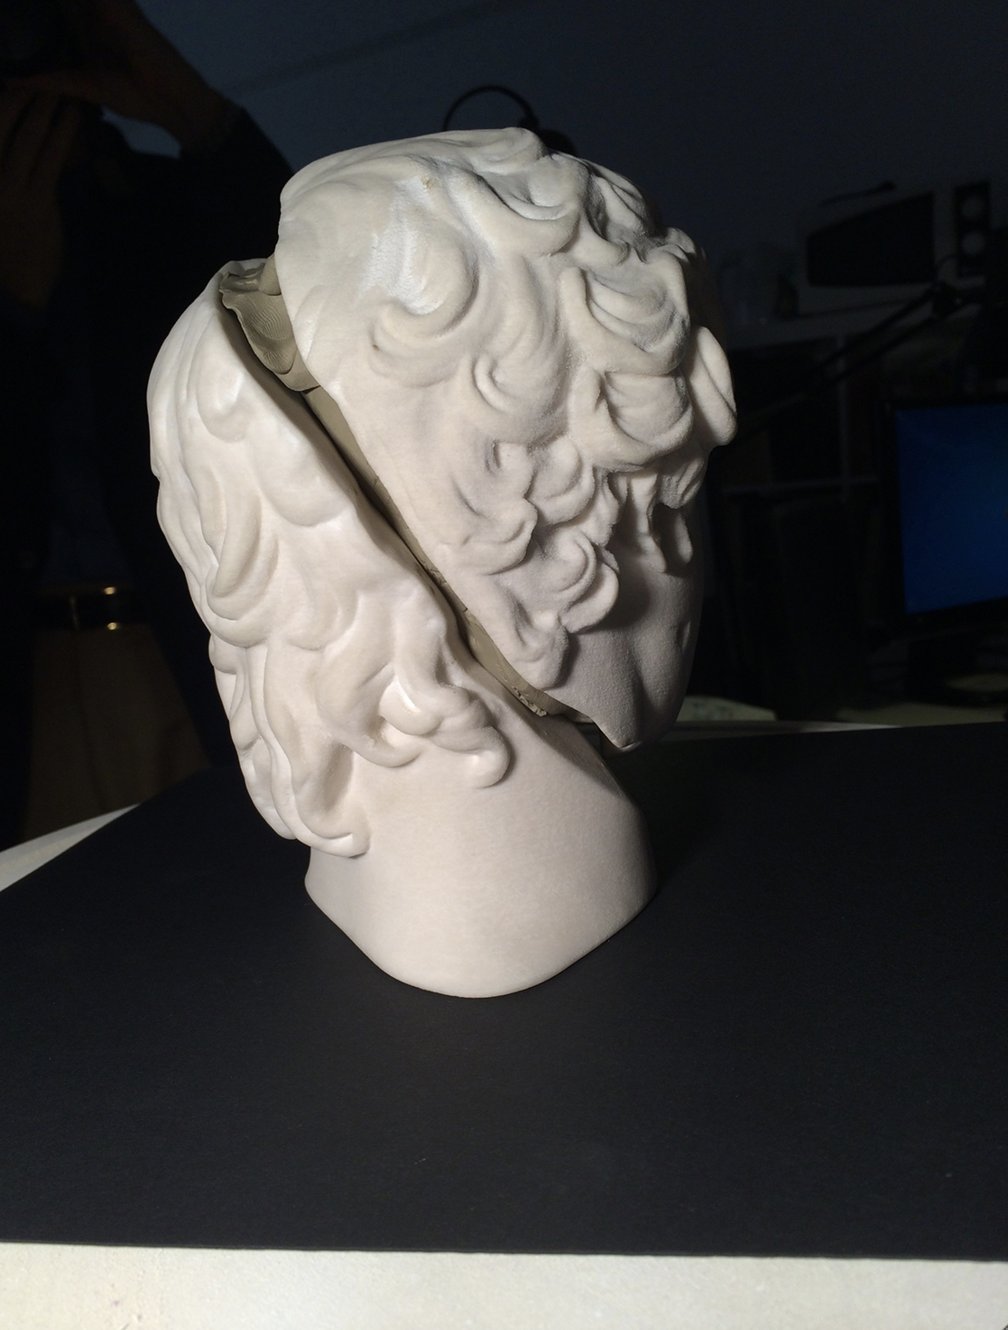 Three-dimensional half-scale model combining the head from the Bust of Antinous 